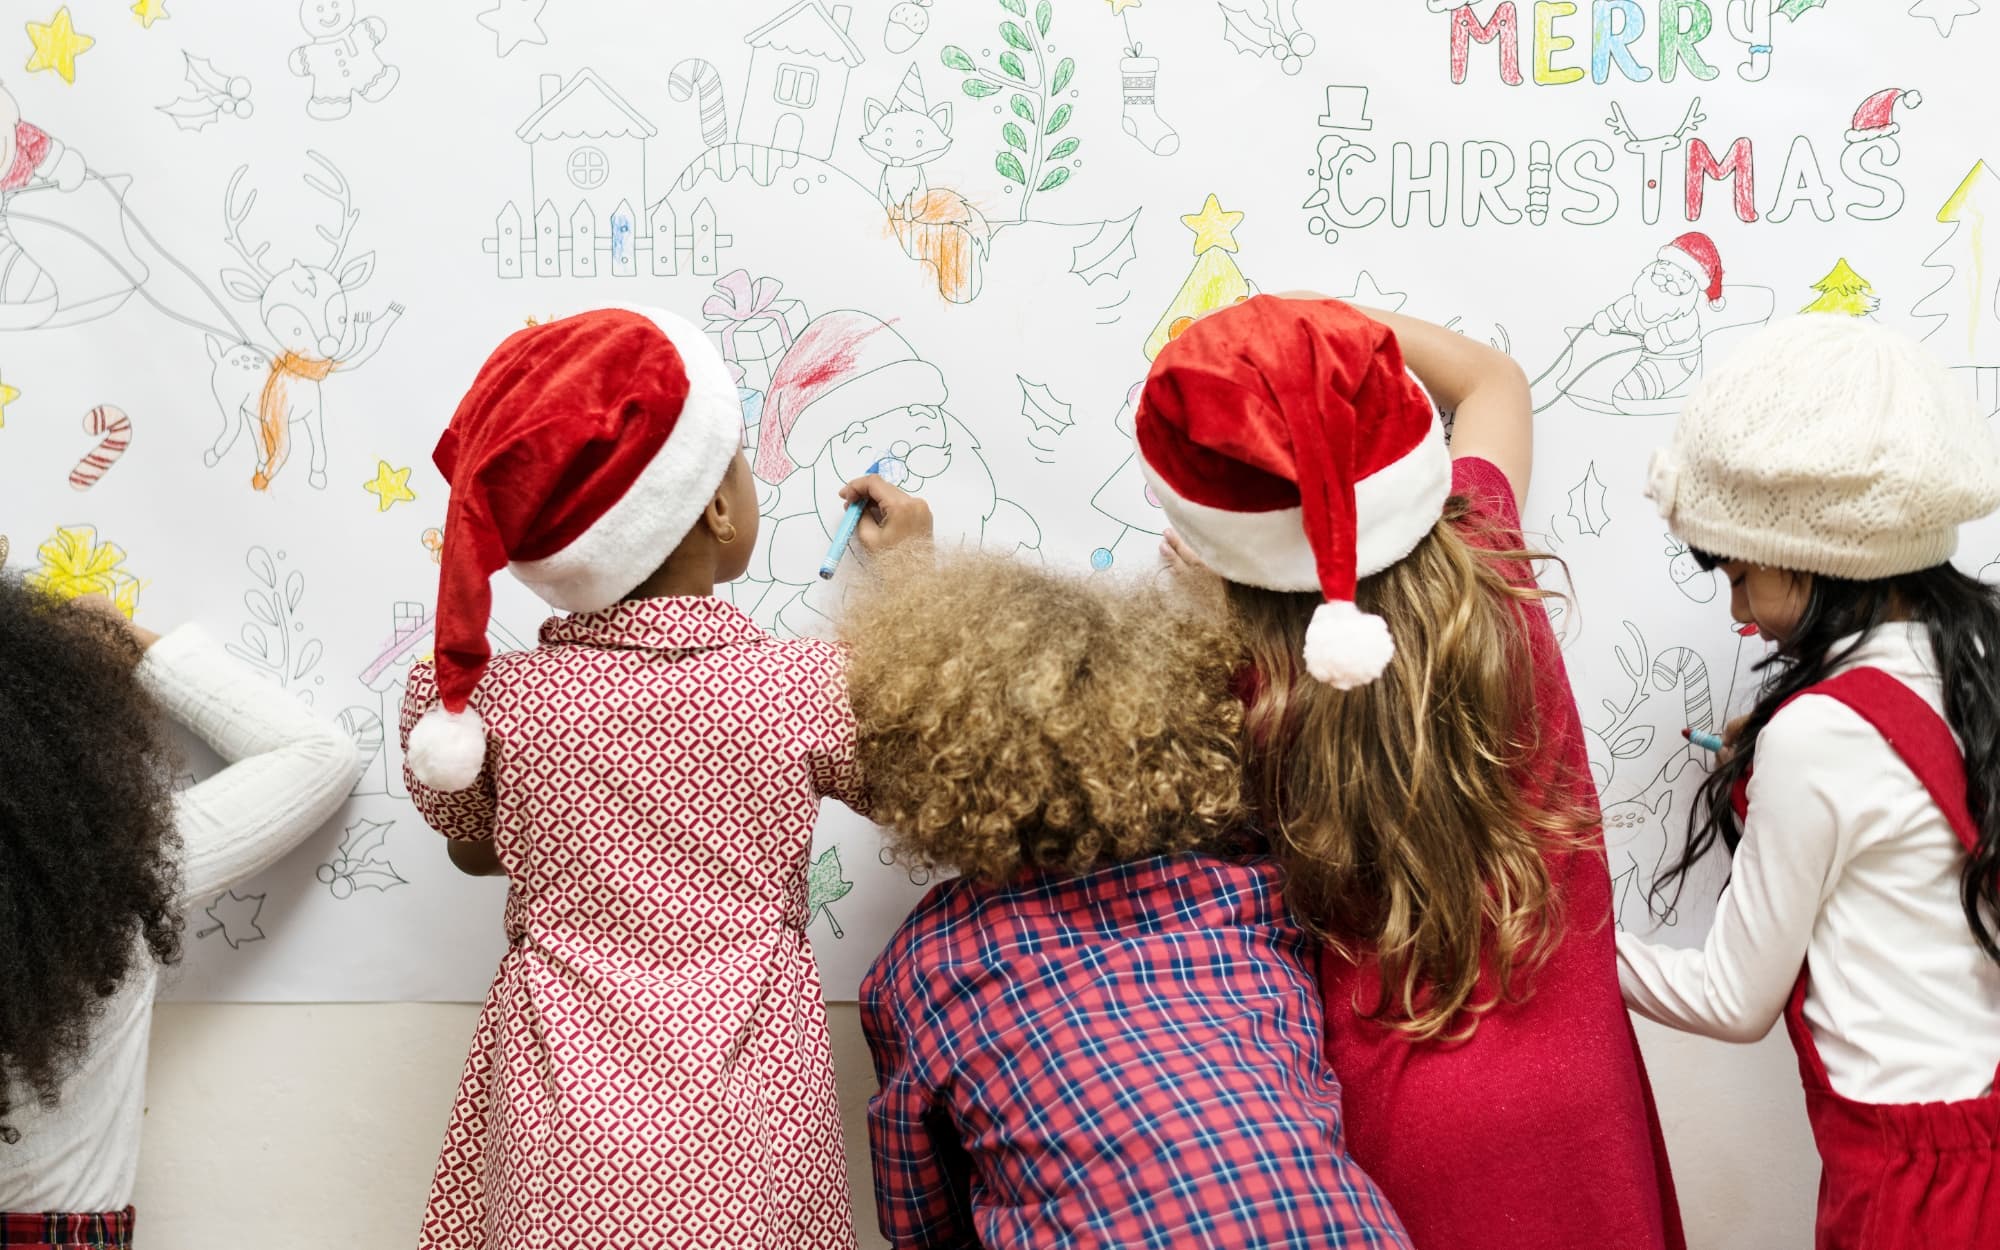 Children wearing Santa hats write Christmas messages on a whiteboard.